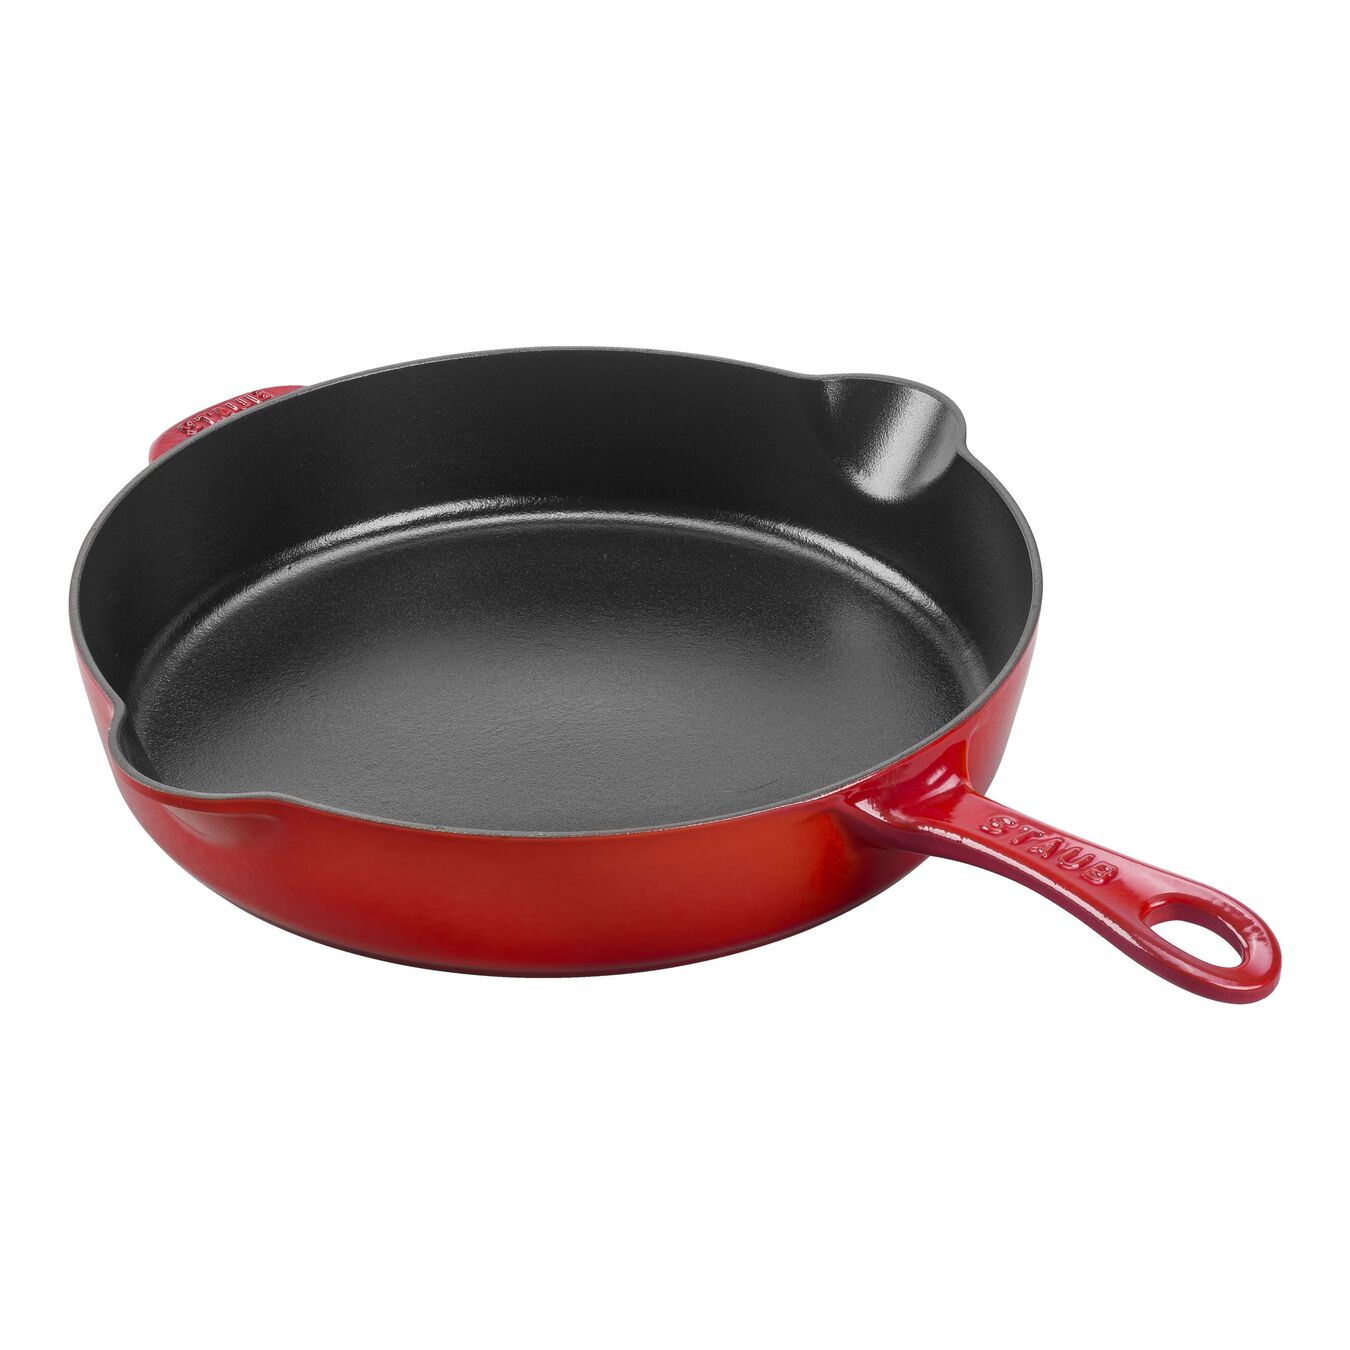 28 cm / 11 inch cast iron Frying pan, cherry - Visual Imperfections,,large 1